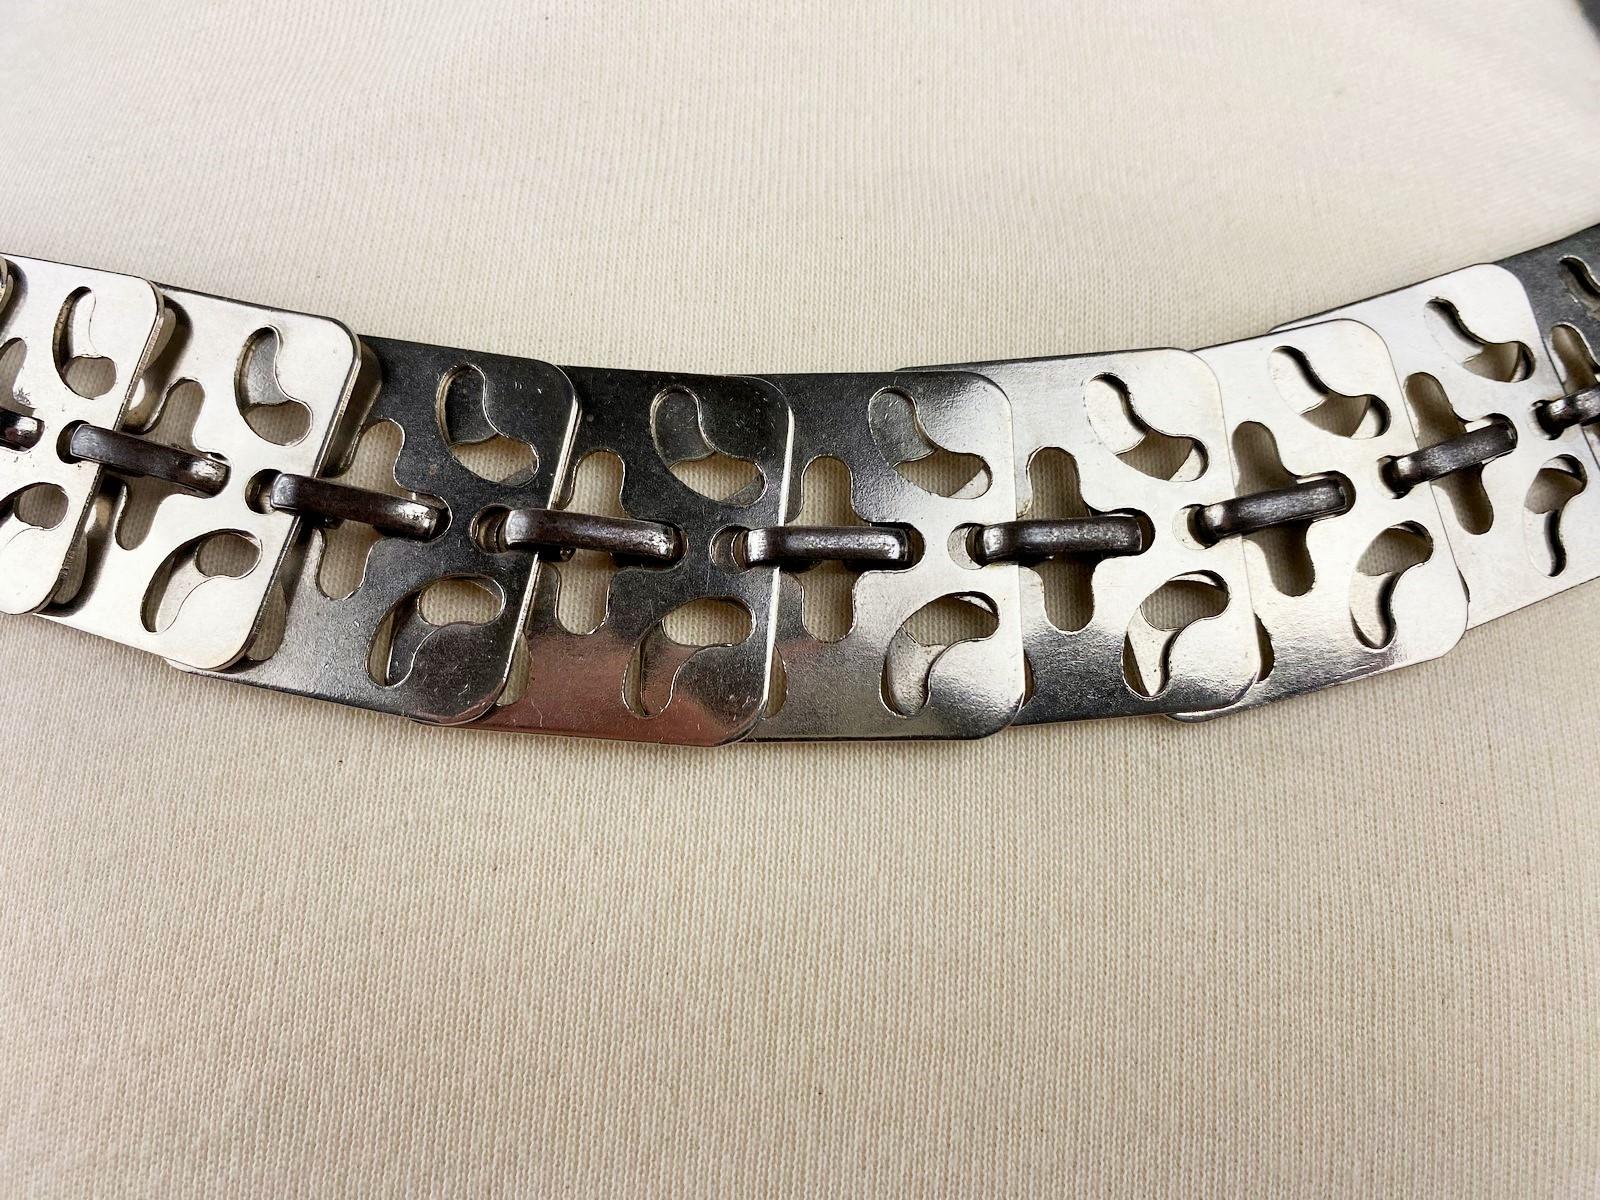 Chromed belt with perforated metal mesh by Paco Rabanne - France Circa 1970 For Sale 3